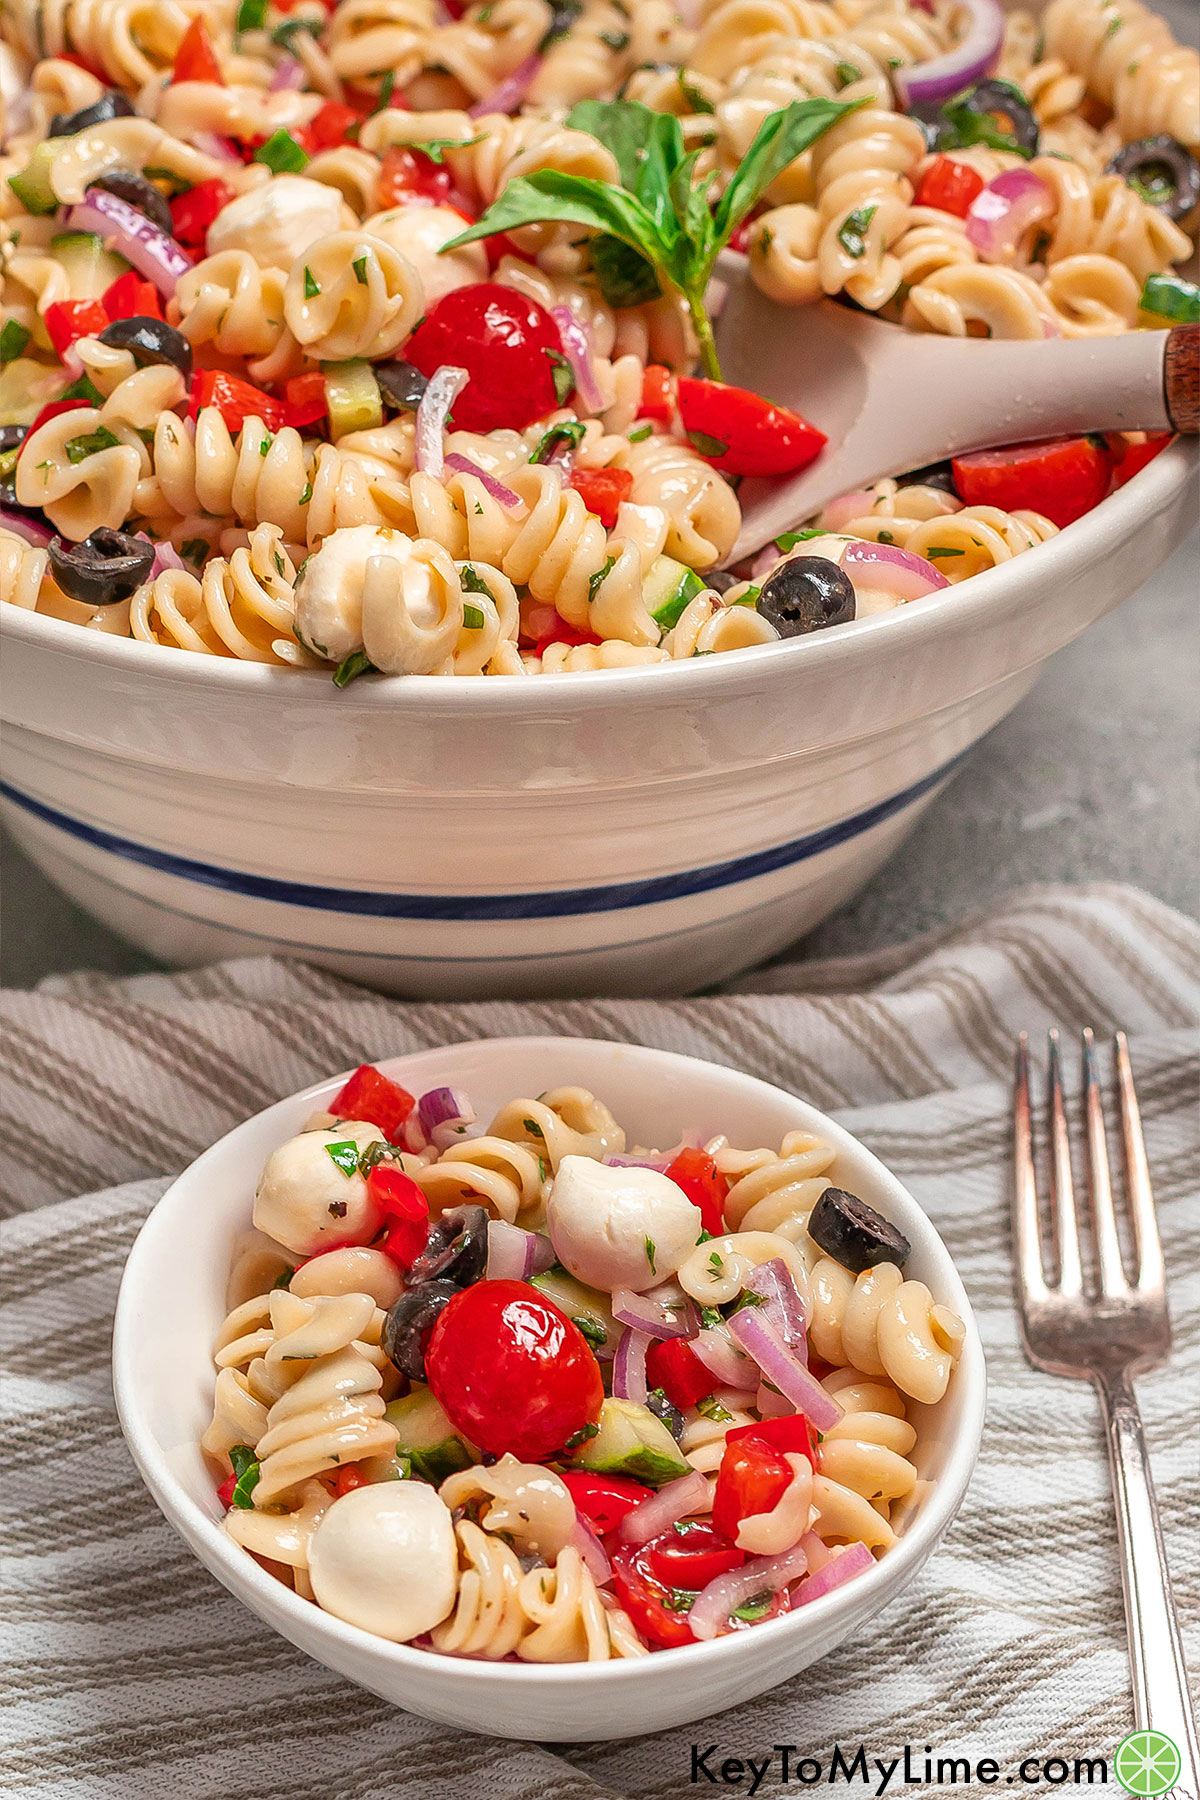 A side image of a large serving dish filled with delicious pasta salad garnished with fresh basil.